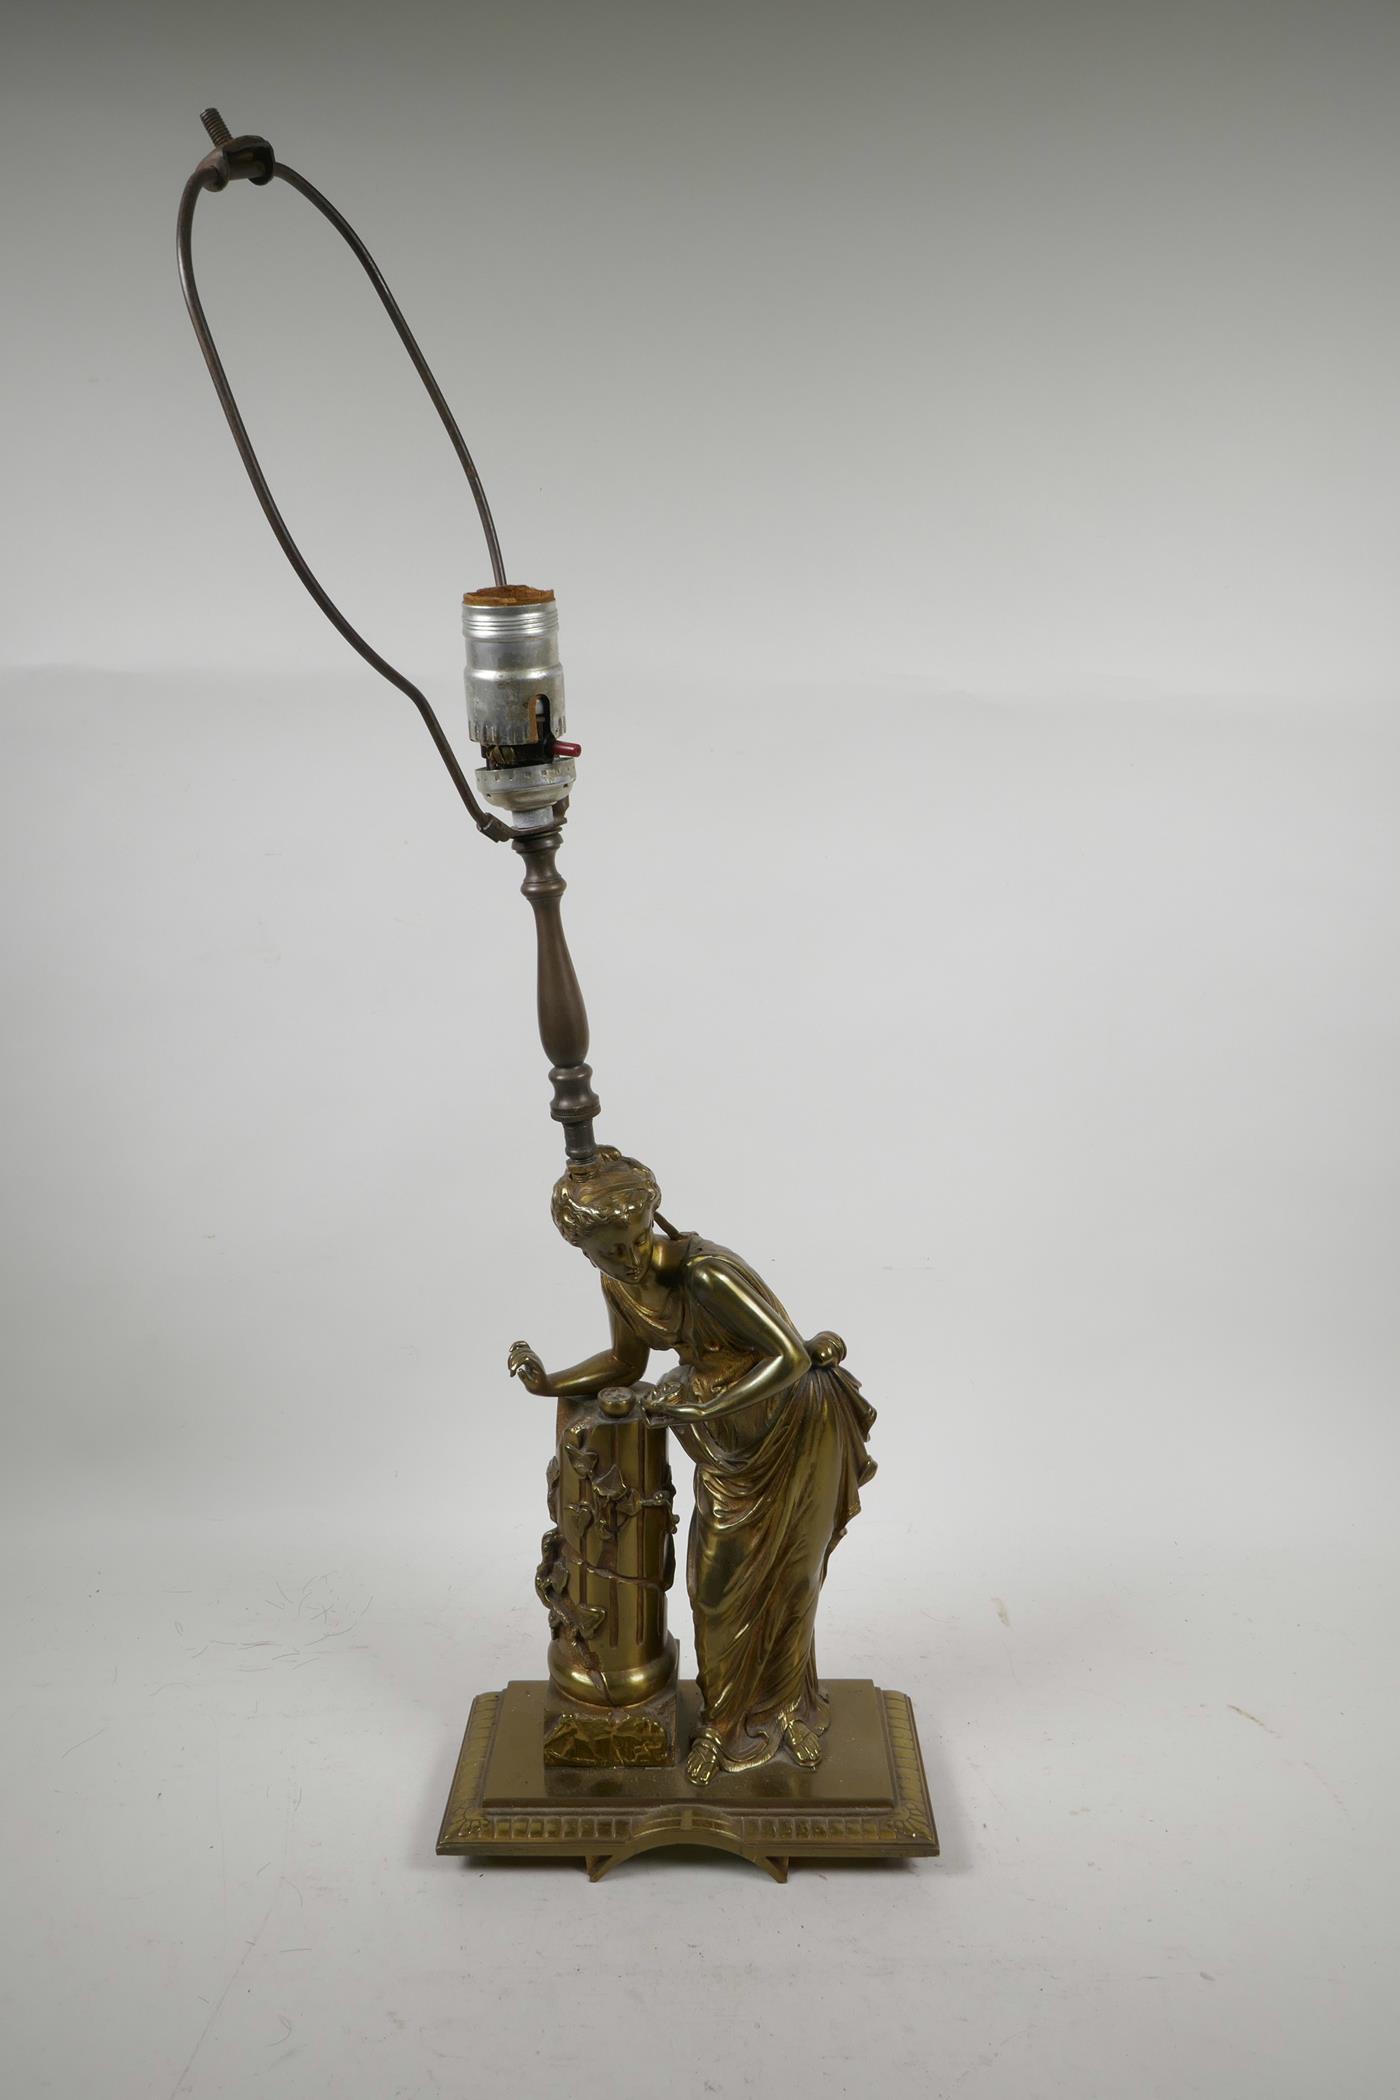 A brass table lamp in the form of a classical woman, 20" high